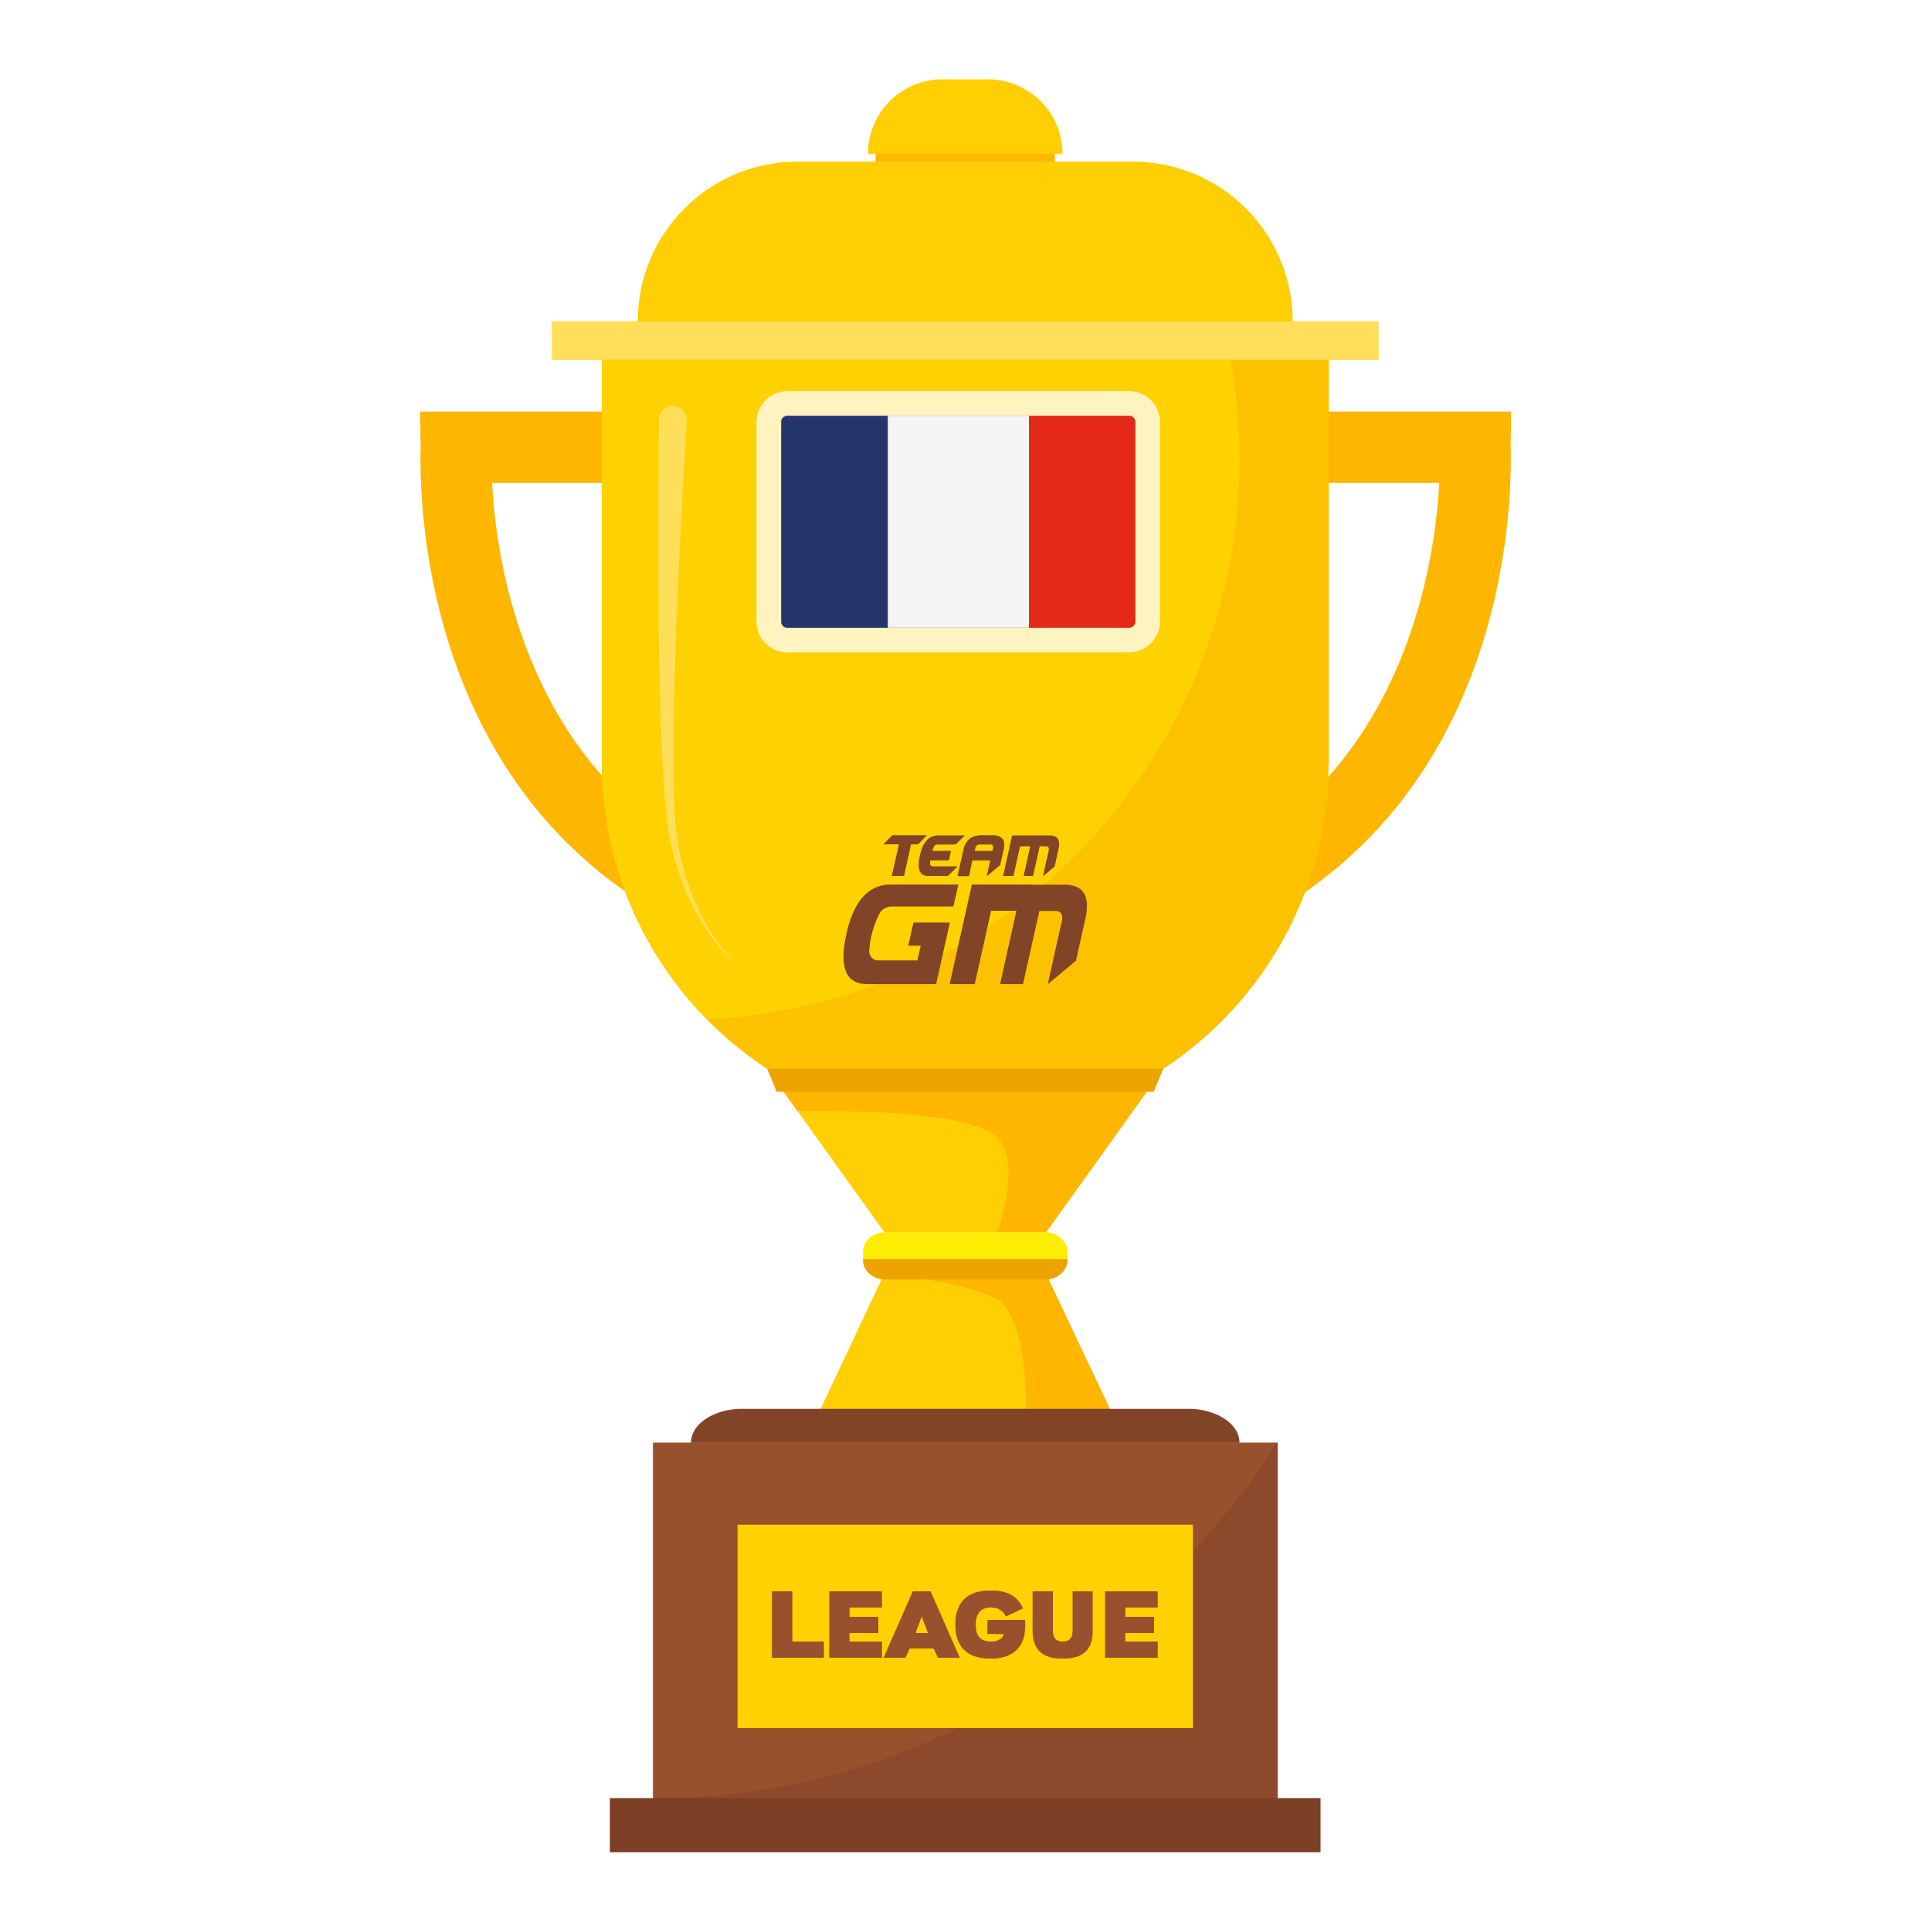 1ST - FRENCH LEAGUE